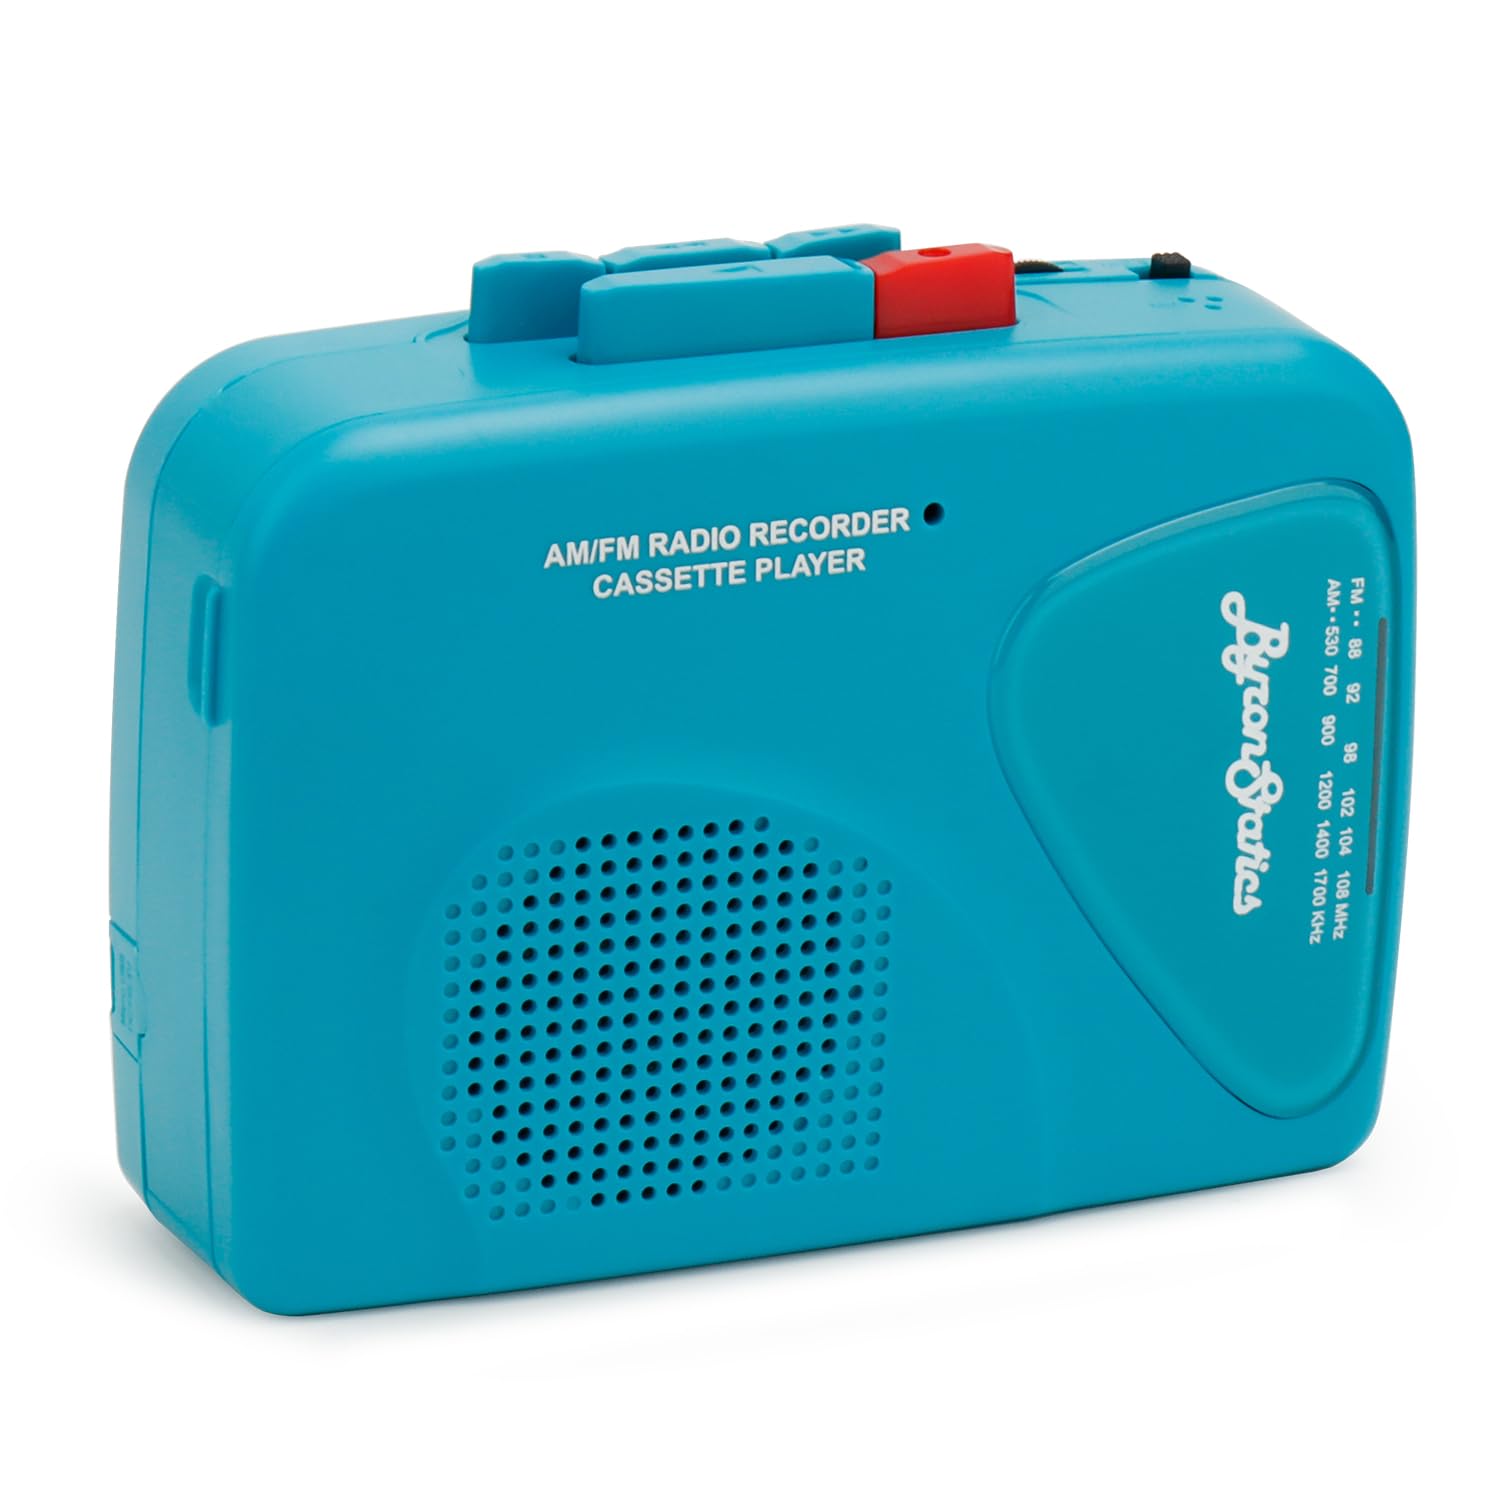 ByronStatics Portable Cassette Players,Recorders,FM AM Radio,Walkman,Tape Player,Built in Mic,External Speakers,Manual Record,VAS Automatic Stop System,2AA Battery Or USB Power Supply,Headphone Teal